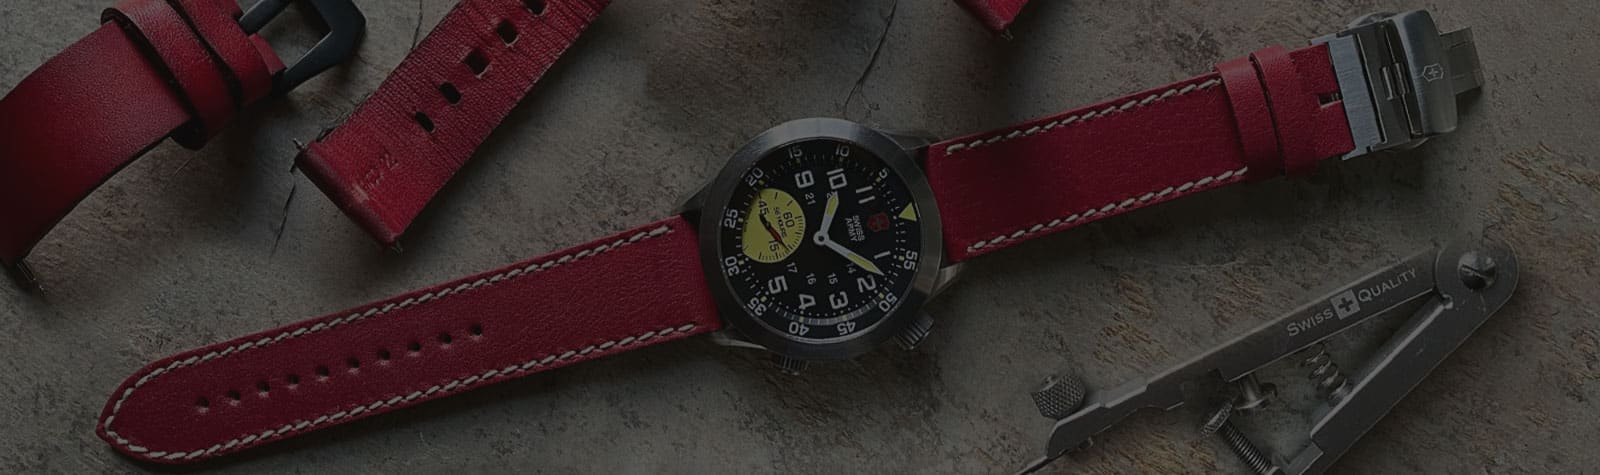 STRAP SWAP: Using the Rare Red Watchband from the 2009 Jubilee Limited Edition Chronograph on Other Victorinox Swiss Army Watches